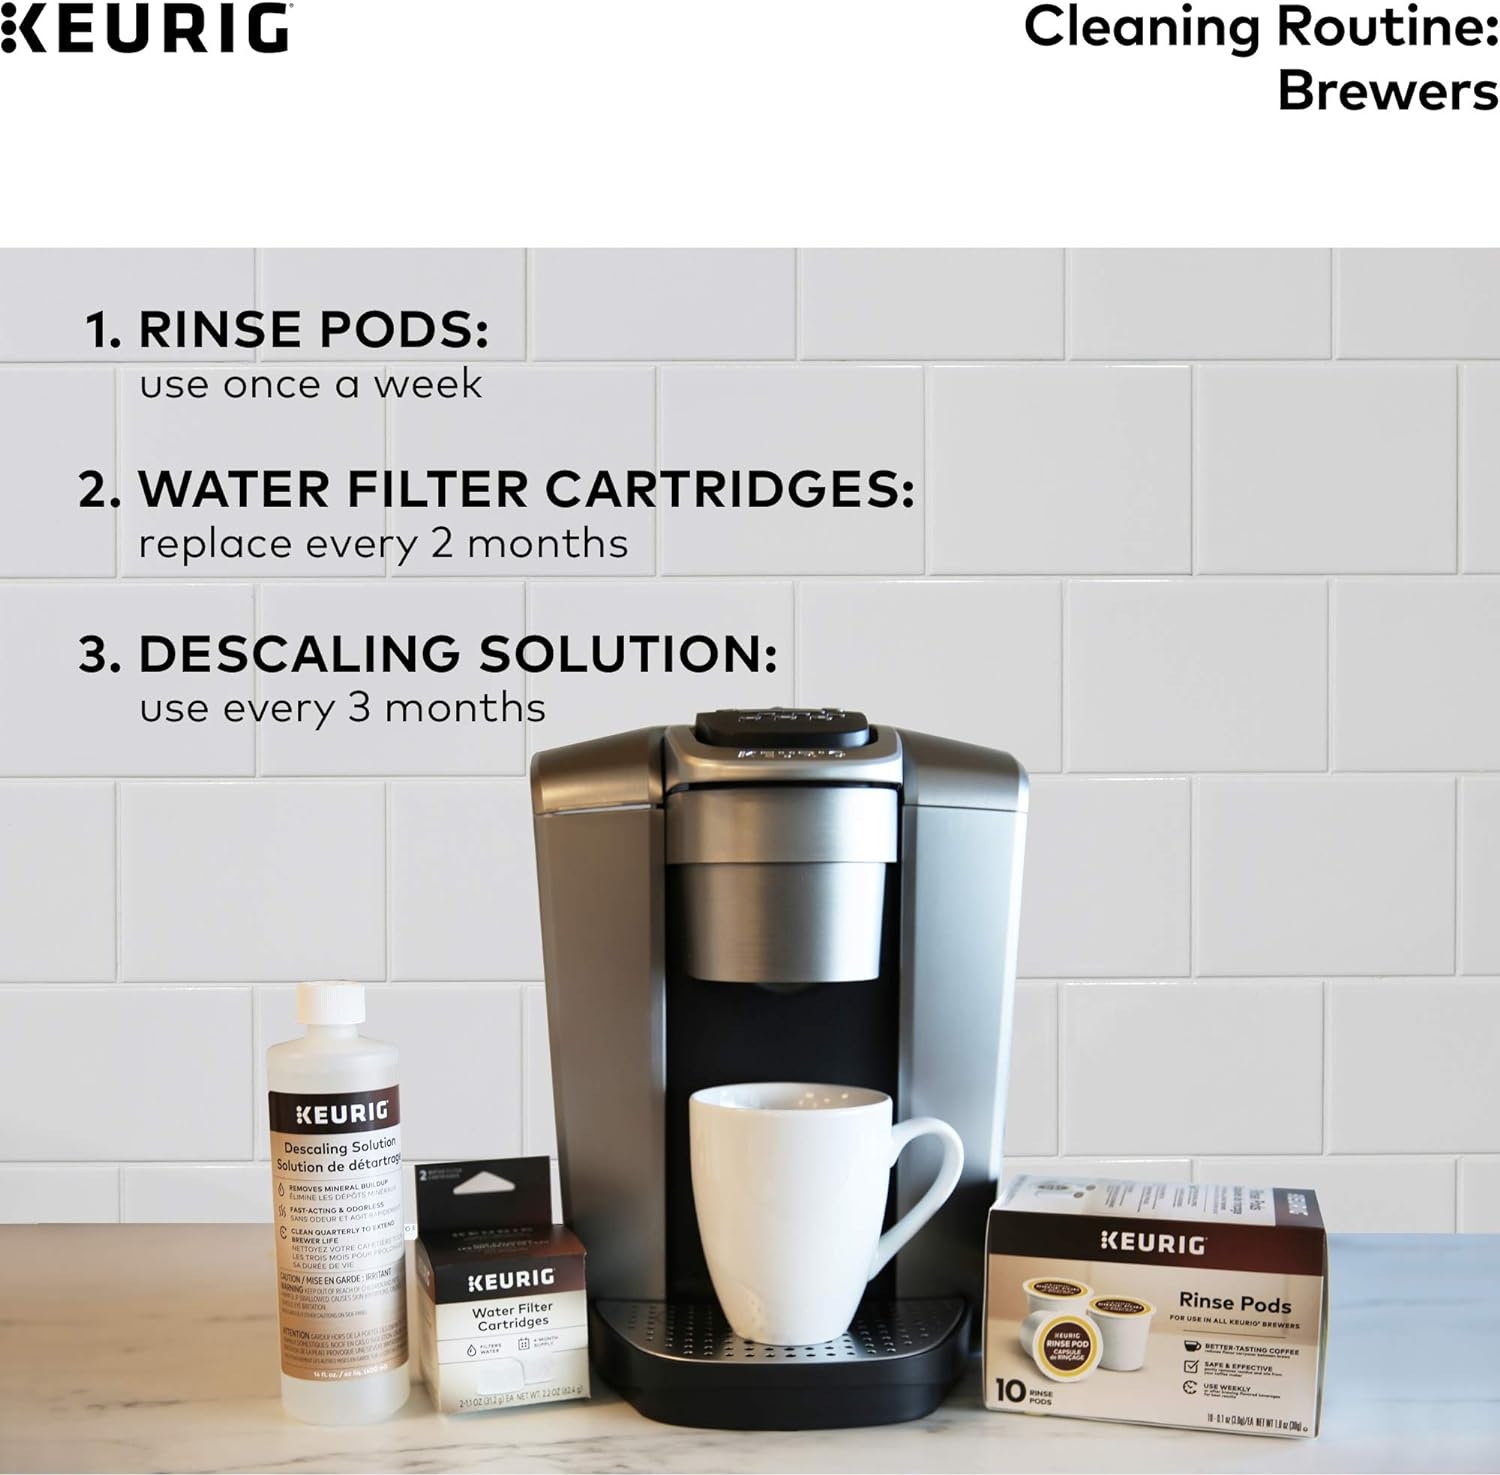 Keurig Brewer Cleaner Includes 14 oz. Descaling Solution, Compatible Classic/1.0 & 2.0 K-Cup Pod Coffee Makers